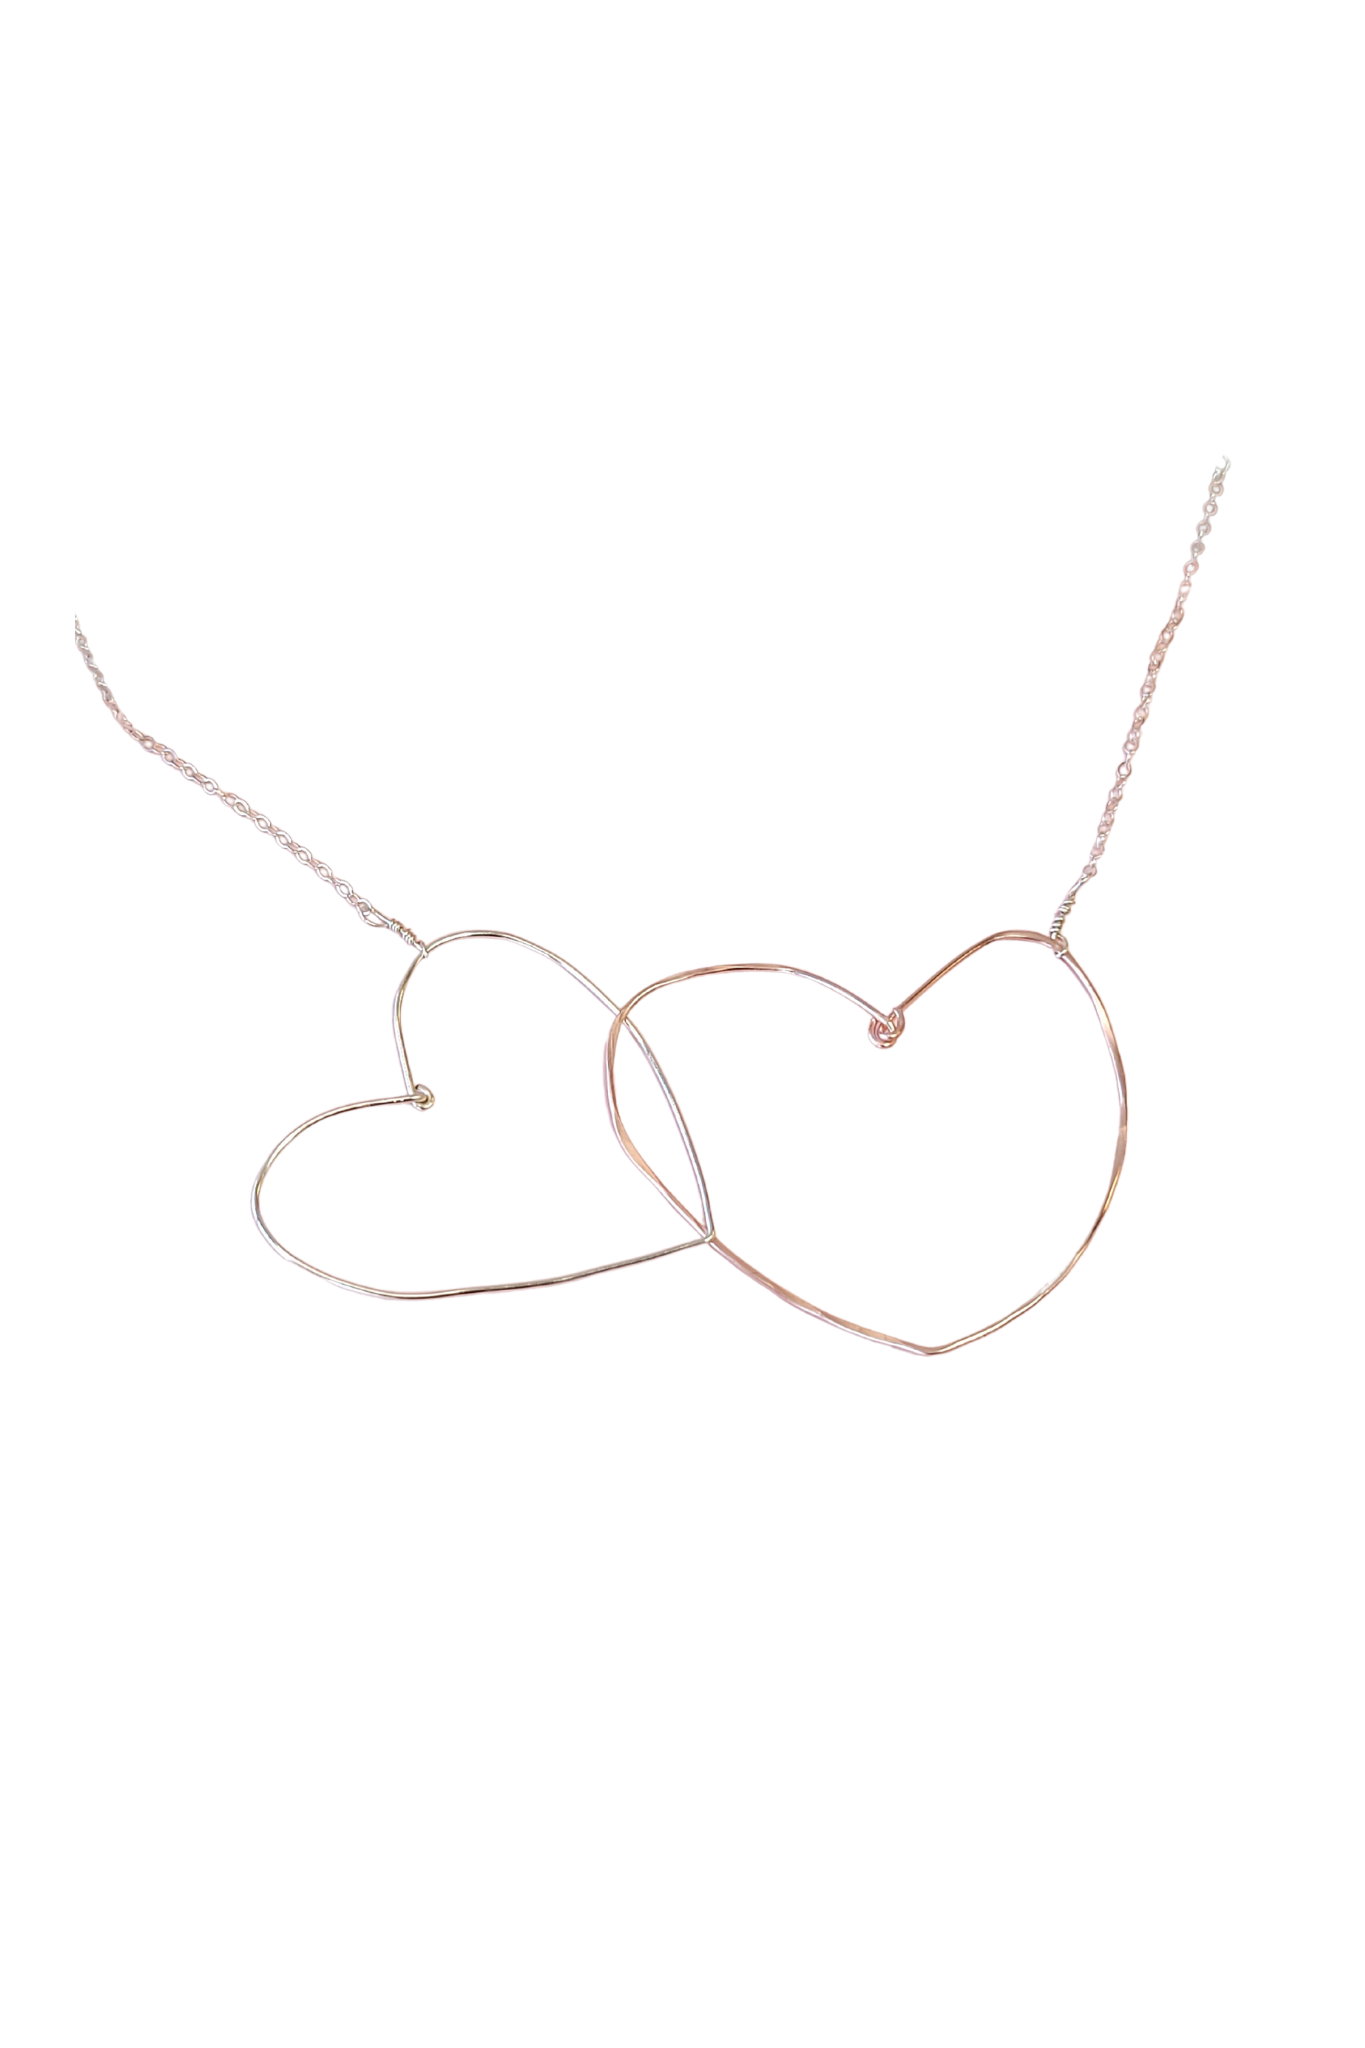 Across the Heart Necklace in Rose Gold and Silver